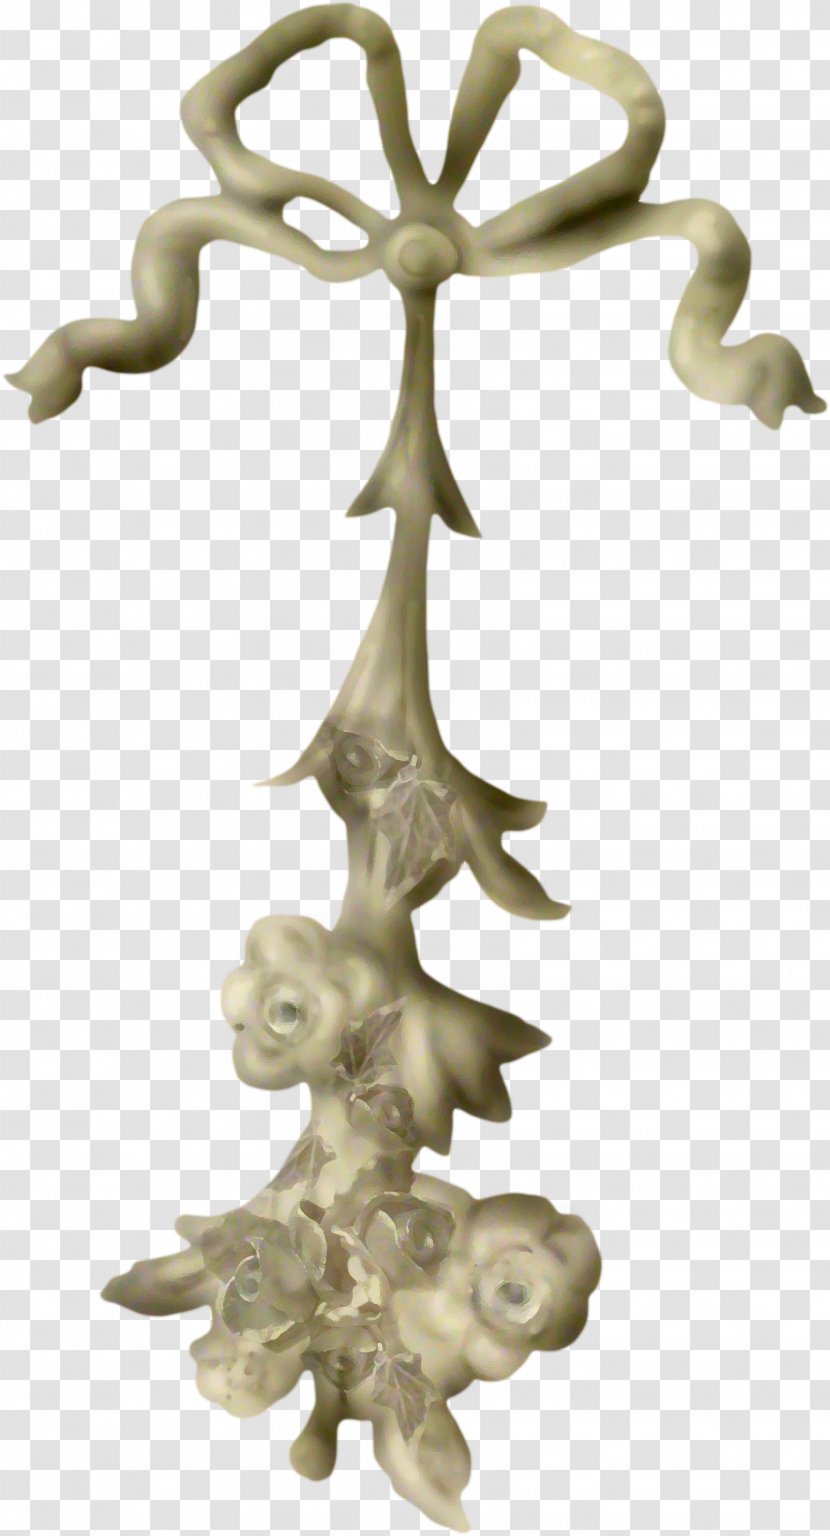 Figurine - STYLE Transparent PNG